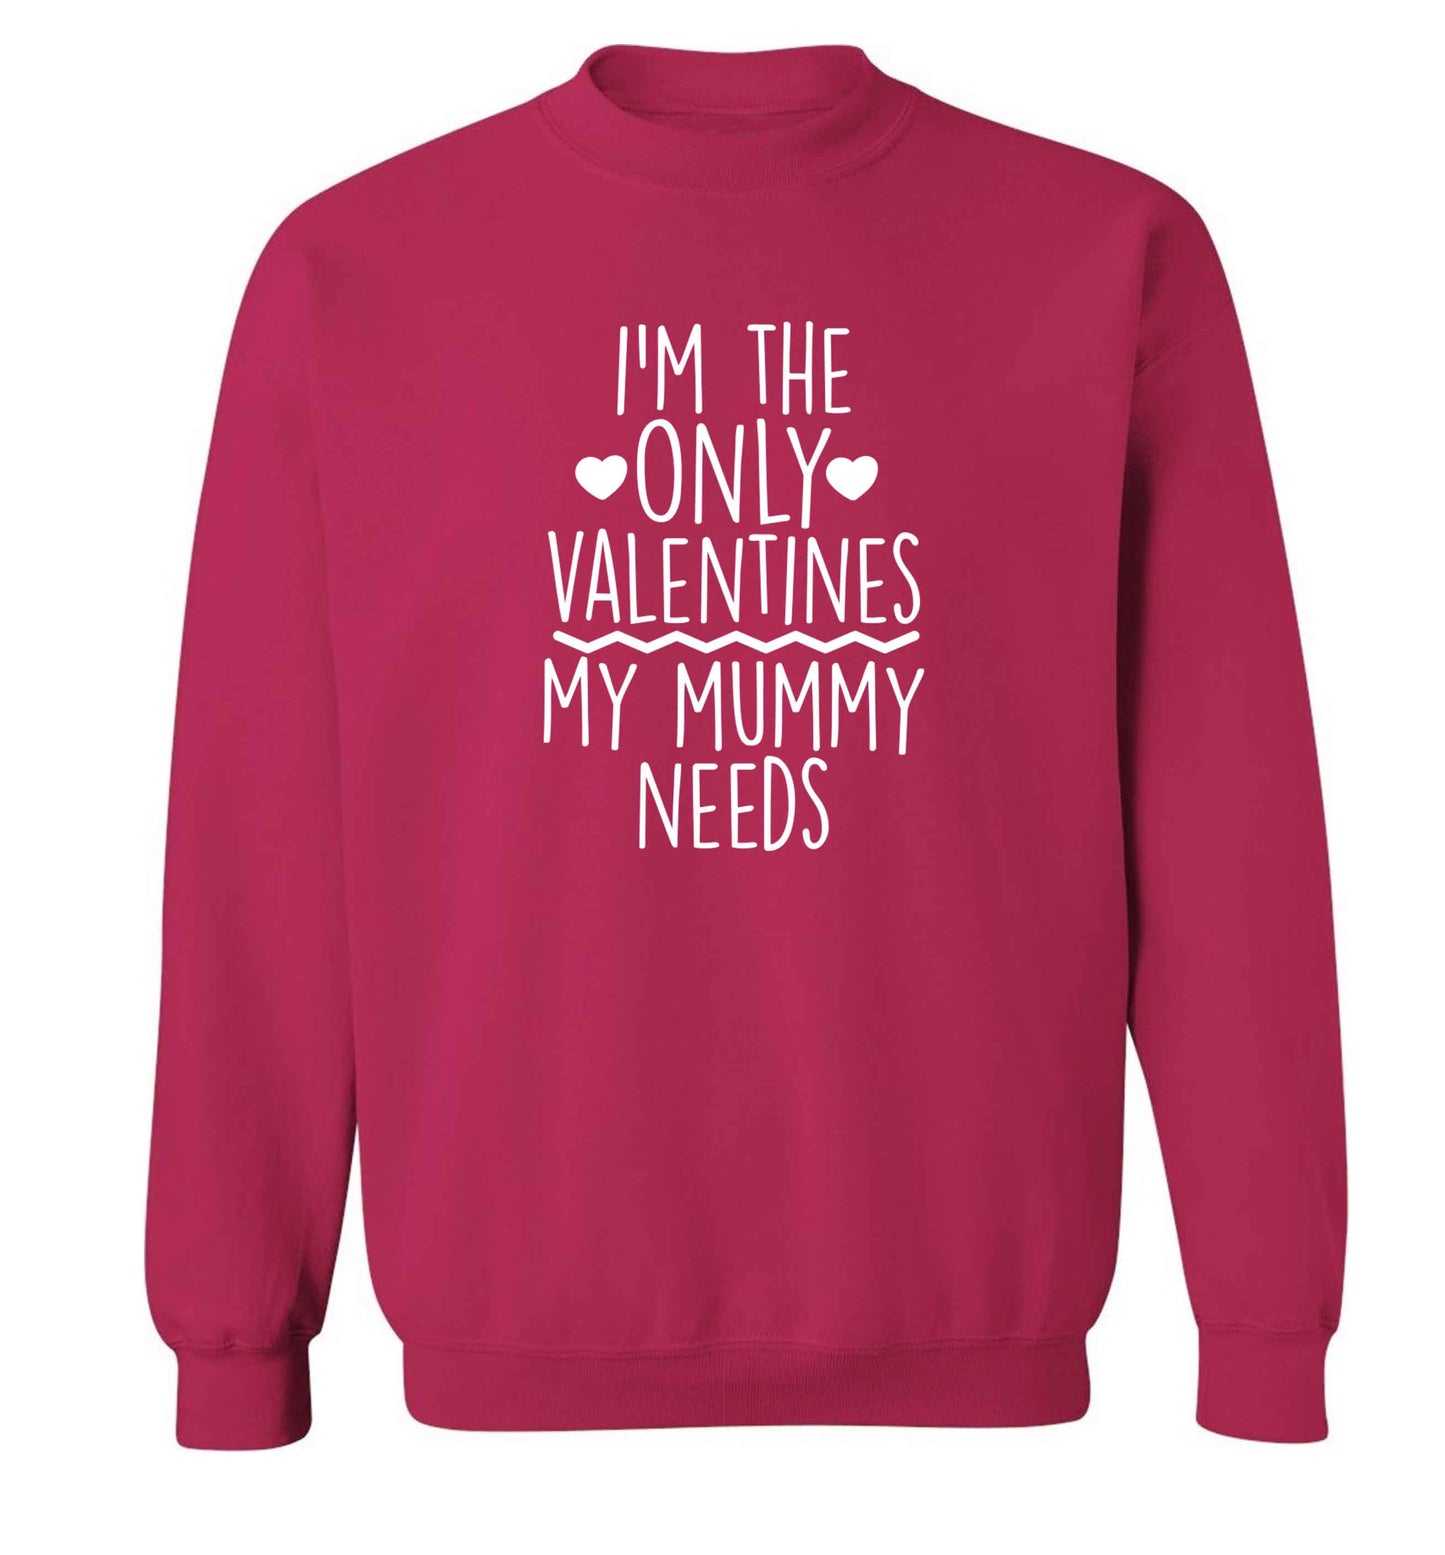 I'm the only valentines my mummy needs adult's unisex pink sweater 2XL